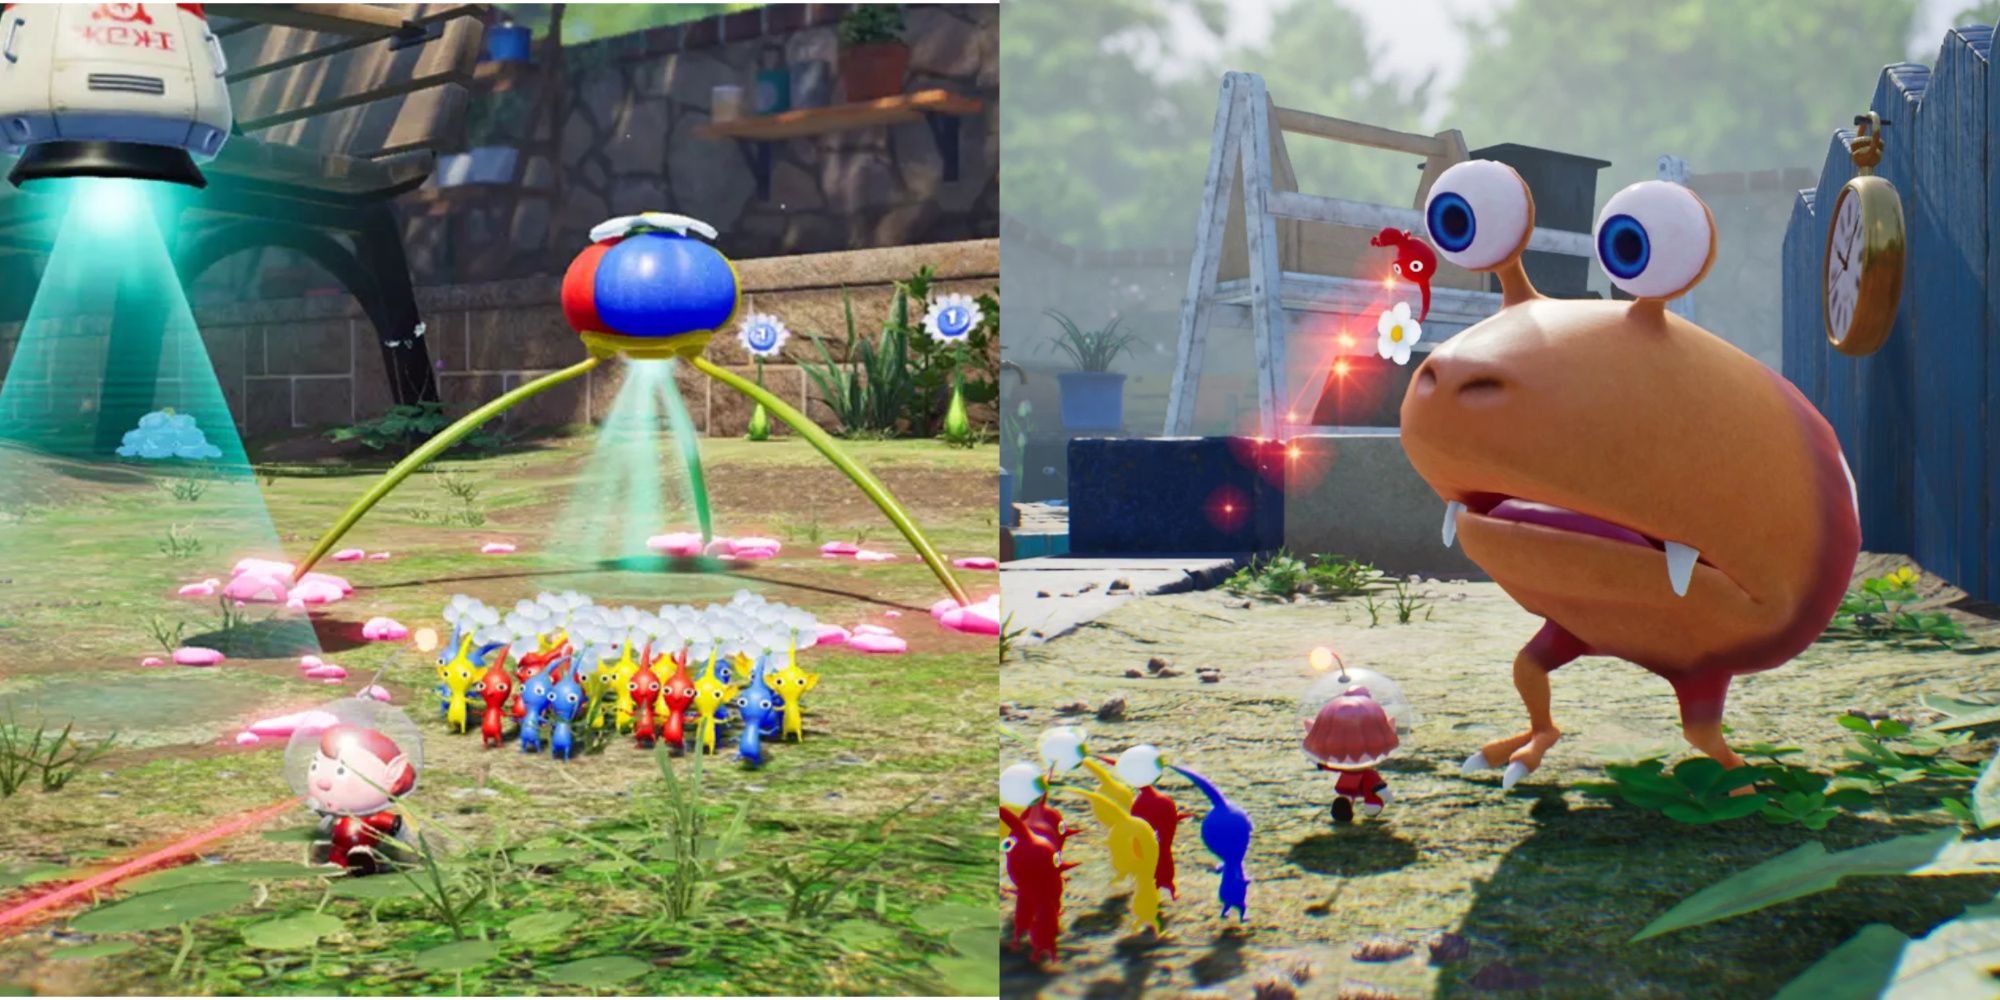 Images depicting Pikmin encountering a Bulborb on the right and follow the main player on the left.